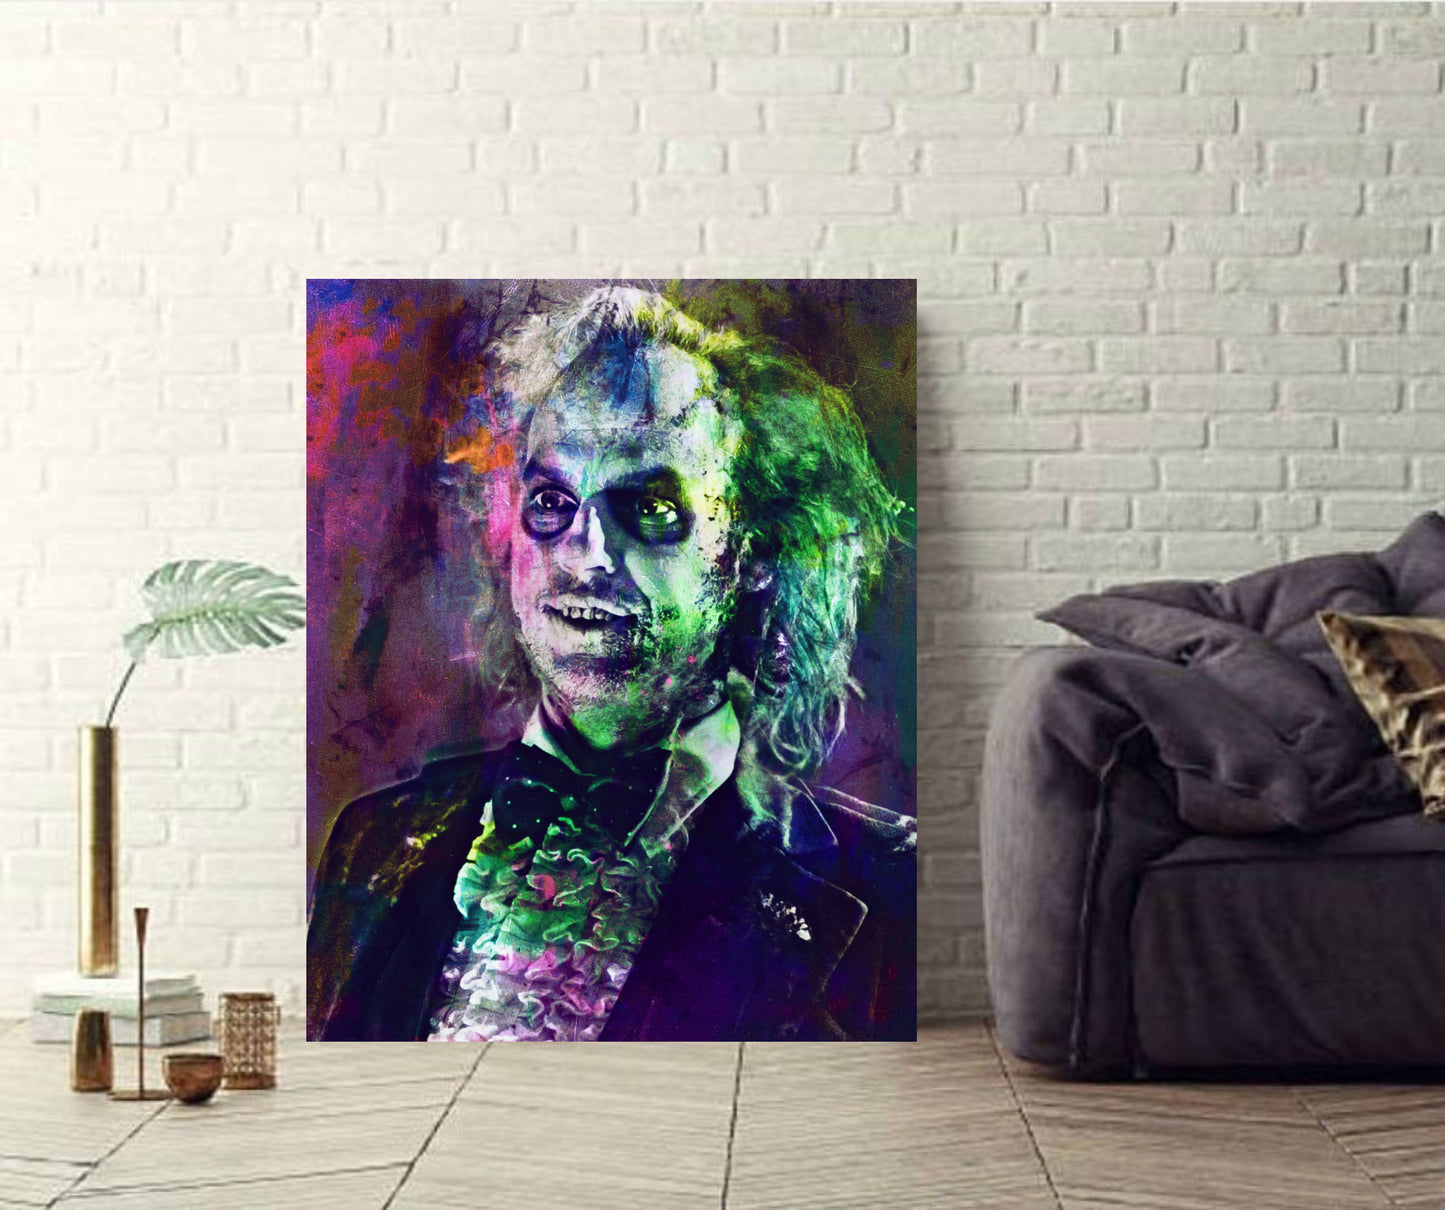 Beetlejuice in Tuxedo Wall Art Print Painting Canvas